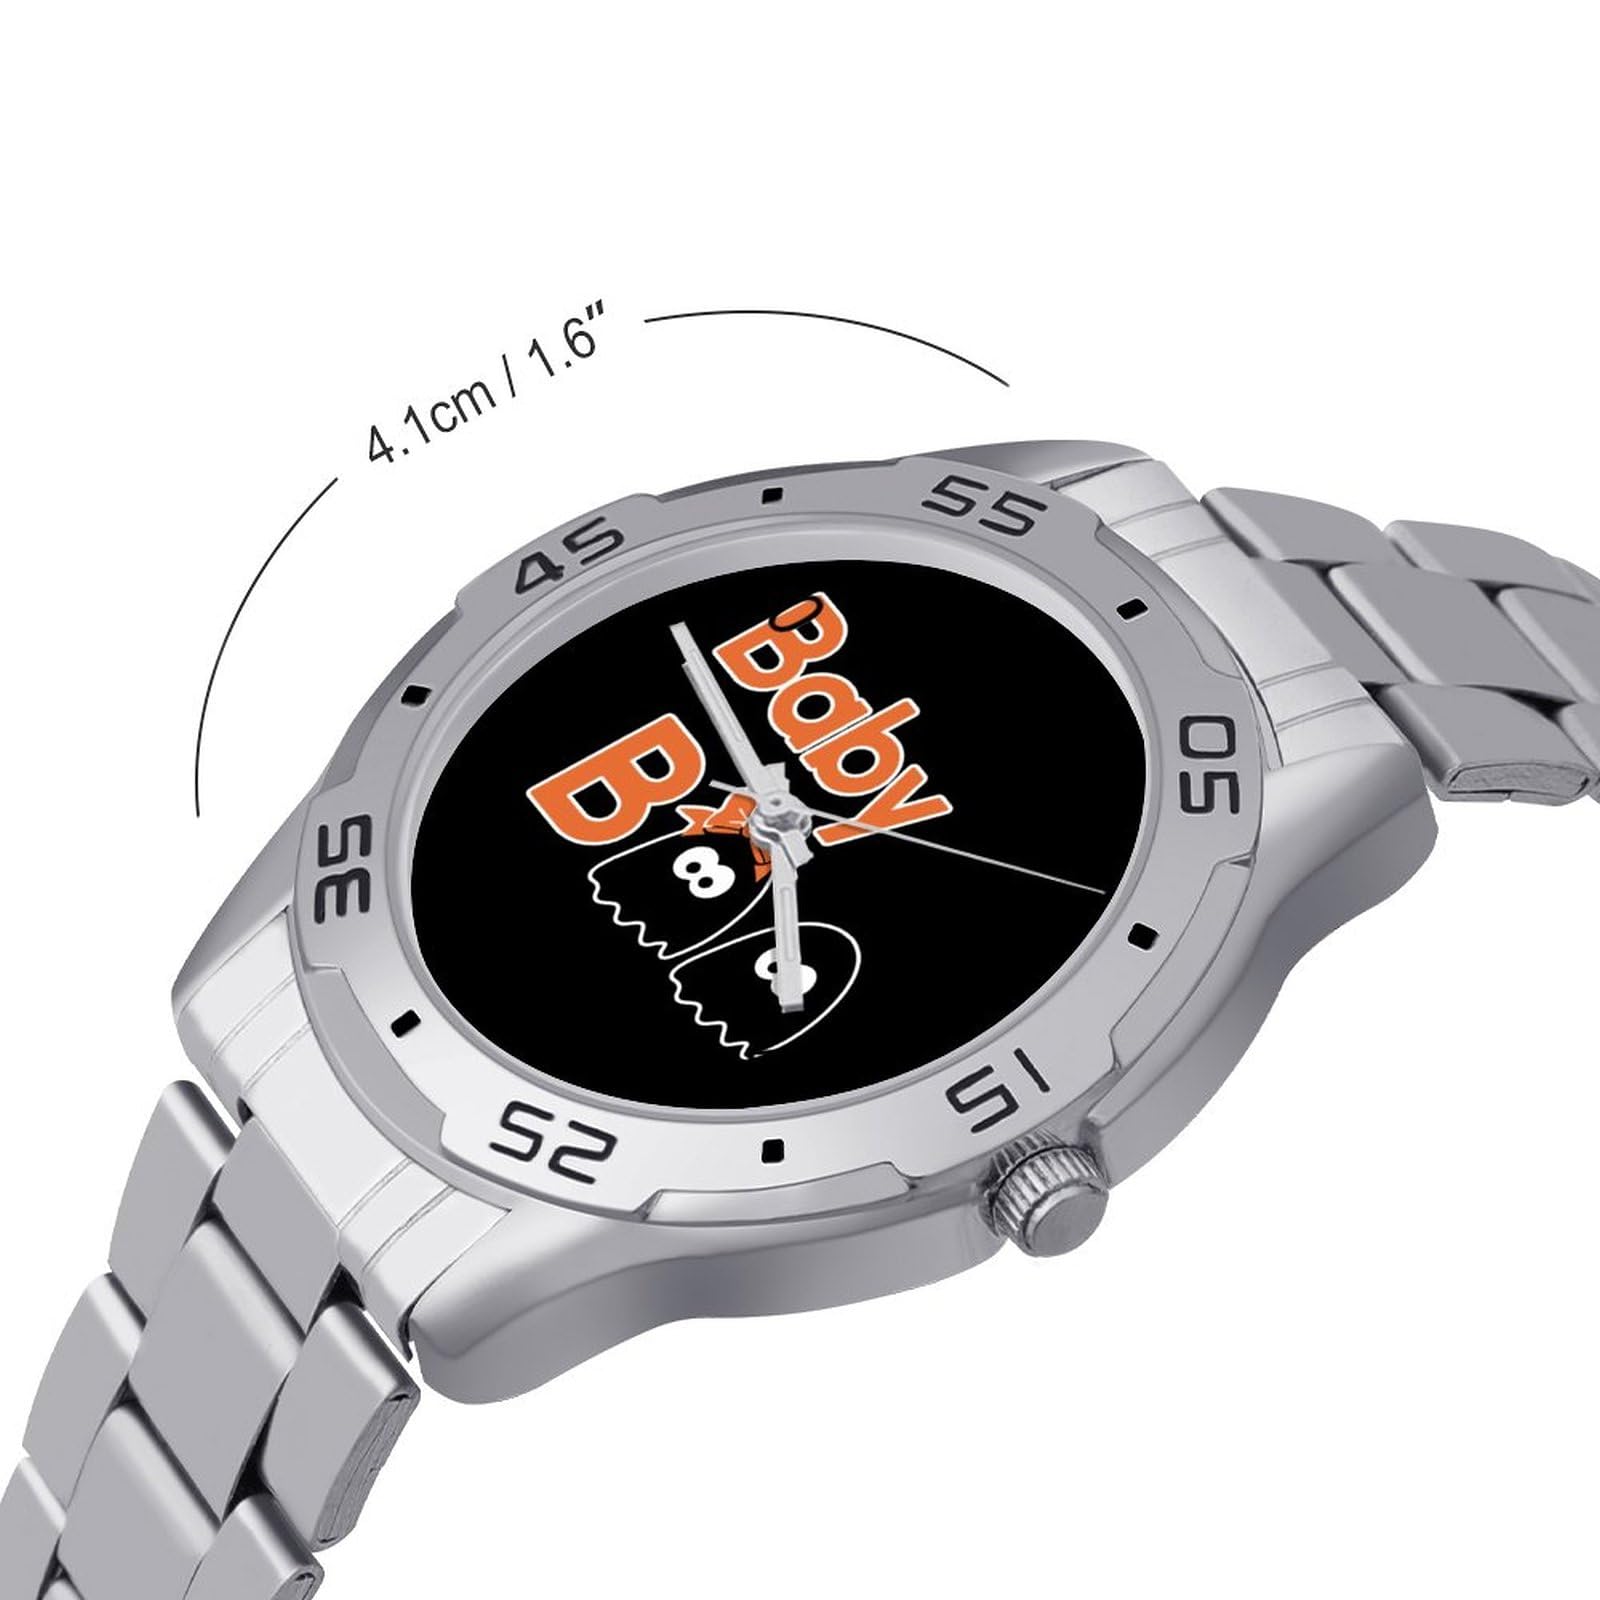 Baby Boo Stainless Steel Band Business Watch Dress Wrist Unique Luxury Work Casual Waterproof Watches